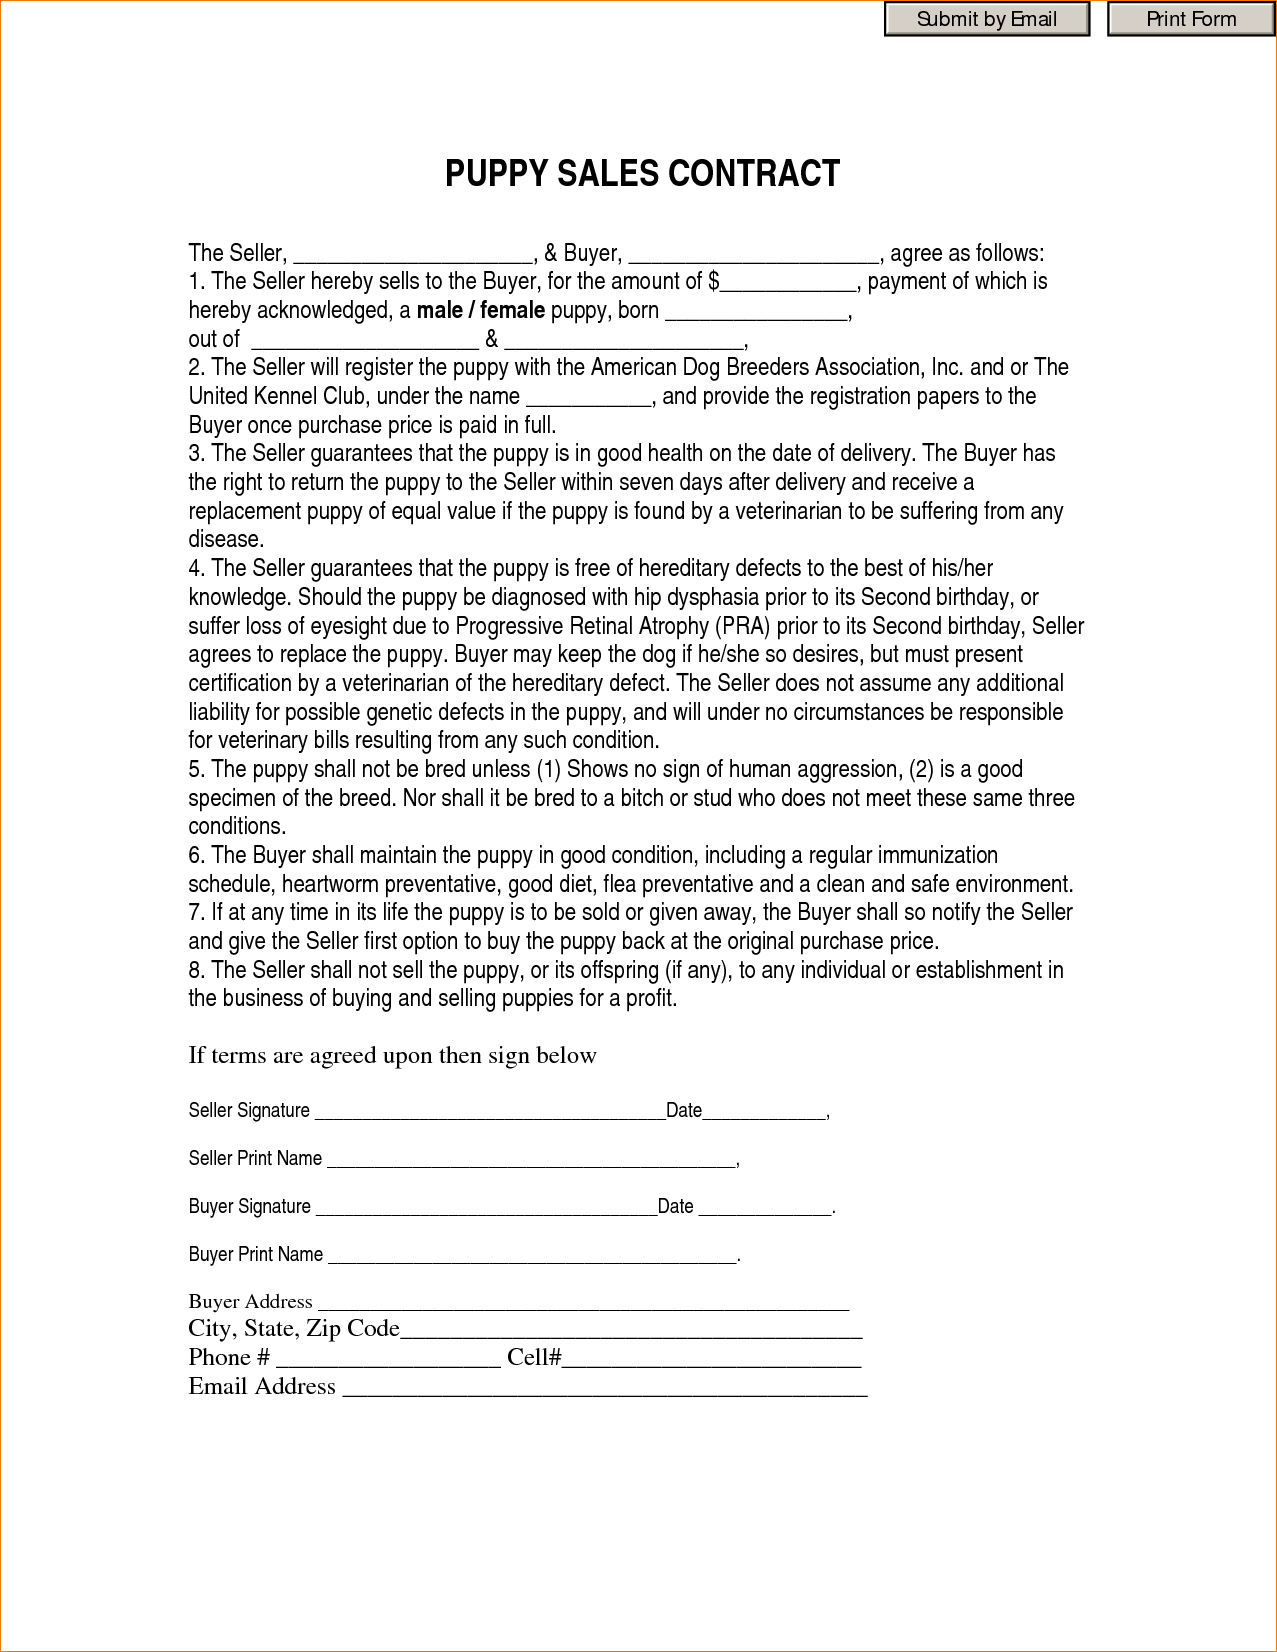 Dog Walking Agreement Form 111116 Contract Puppy Sales Contract Form - Free Printable Puppy Sales Contract